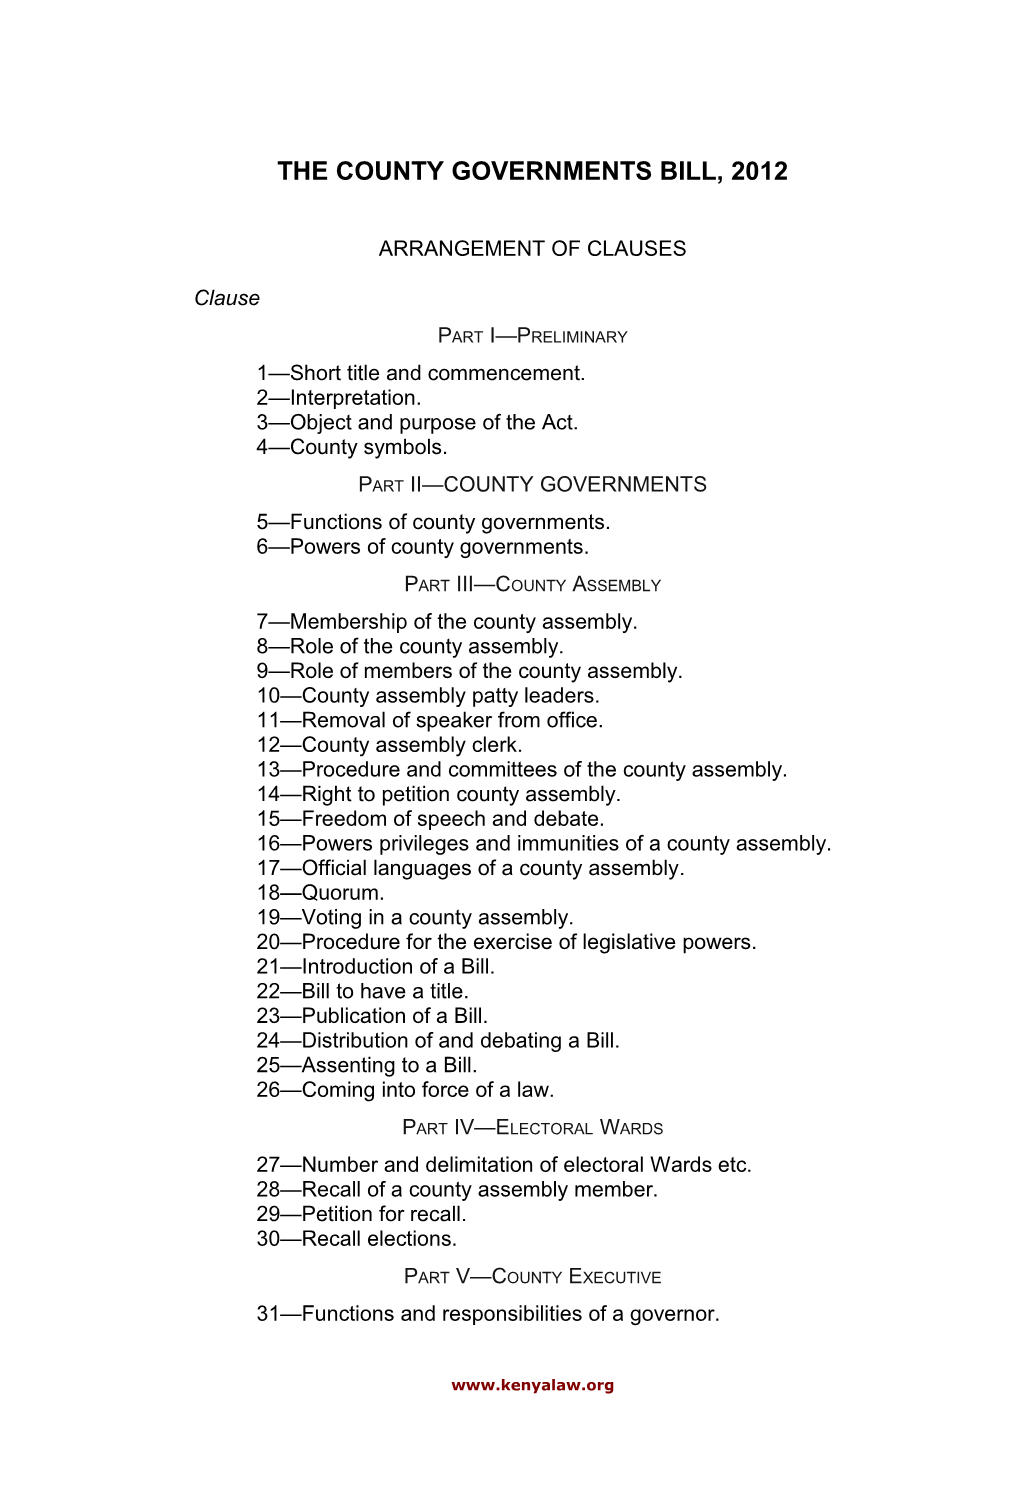 The County Governments Bill, 2012